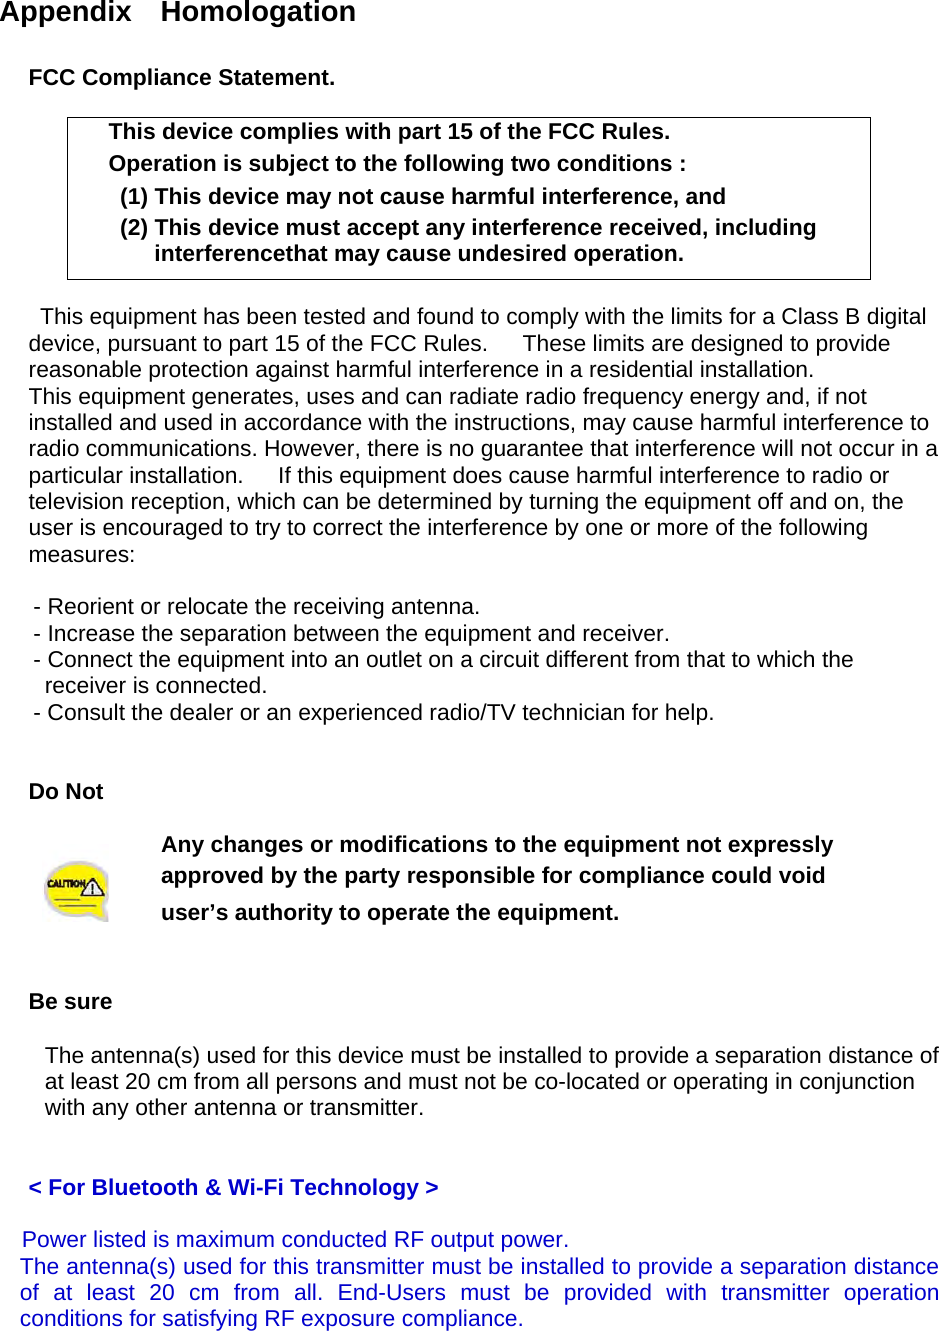  Appendix  Homologation  FCC Compliance Statement.  This device complies with part 15 of the FCC Rules. Operation is subject to the following two conditions :   (1) This device may not cause harmful interference, and   (2) This device must accept any interference received, including interferencethat may cause undesired operation.  This equipment has been tested and found to comply with the limits for a Class B digital device, pursuant to part 15 of the FCC Rules.      These limits are designed to provide reasonable protection against harmful interference in a residential installation. This equipment generates, uses and can radiate radio frequency energy and, if not installed and used in accordance with the instructions, may cause harmful interference to radio communications. However, there is no guarantee that interference will not occur in a particular installation.      If this equipment does cause harmful interference to radio or television reception, which can be determined by turning the equipment off and on, the user is encouraged to try to correct the interference by one or more of the following measures:        - Reorient or relocate the receiving antenna.       - Increase the separation between the equipment and receiver.       - Connect the equipment into an outlet on a circuit different from that to which the receiver is connected.       - Consult the dealer or an experienced radio/TV technician for help.   Do Not   Any changes or modifications to the equipment not expressly   approved by the party responsible for compliance could void user’s authority to operate the equipment.   Be sure  The antenna(s) used for this device must be installed to provide a separation distance of   at least 20 cm from all persons and must not be co-located or operating in conjunction   with any other antenna or transmitter.     &lt; For Bluetooth &amp; Wi-Fi Technology &gt;  Power listed is maximum conducted RF output power.   The antenna(s) used for this transmitter must be installed to provide a separation distance of at least 20 cm from all. End-Users must be provided with transmitter operation conditions for satisfying RF exposure compliance.   